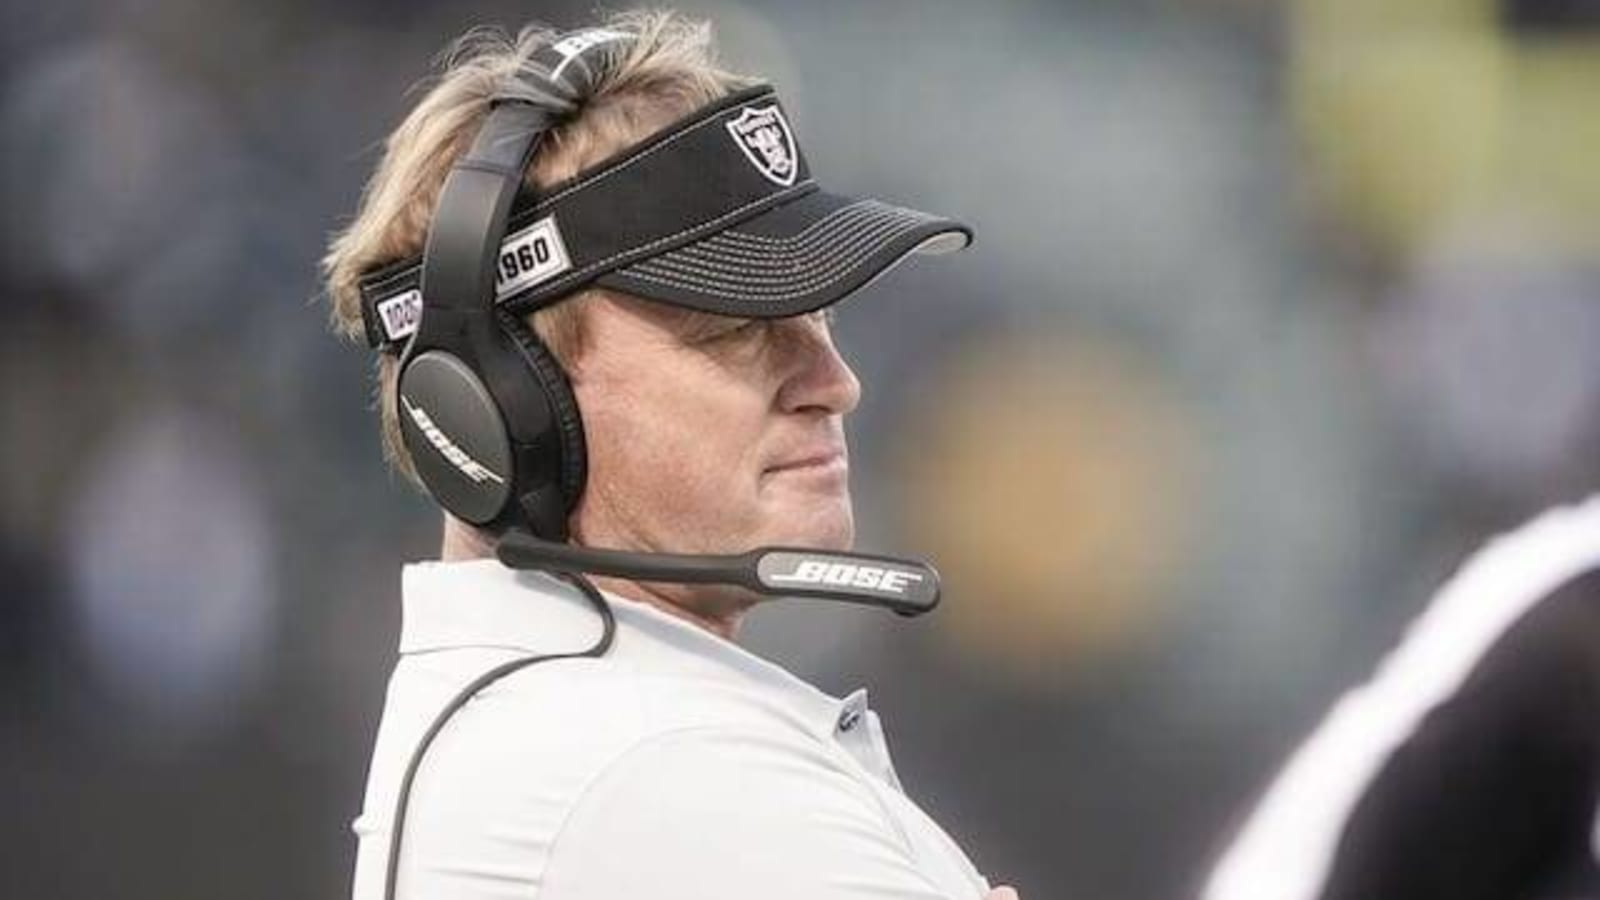 Nevada Court Rules Jon Gruden Can’t Sue NFL Over Dismissal As Raiders Coach